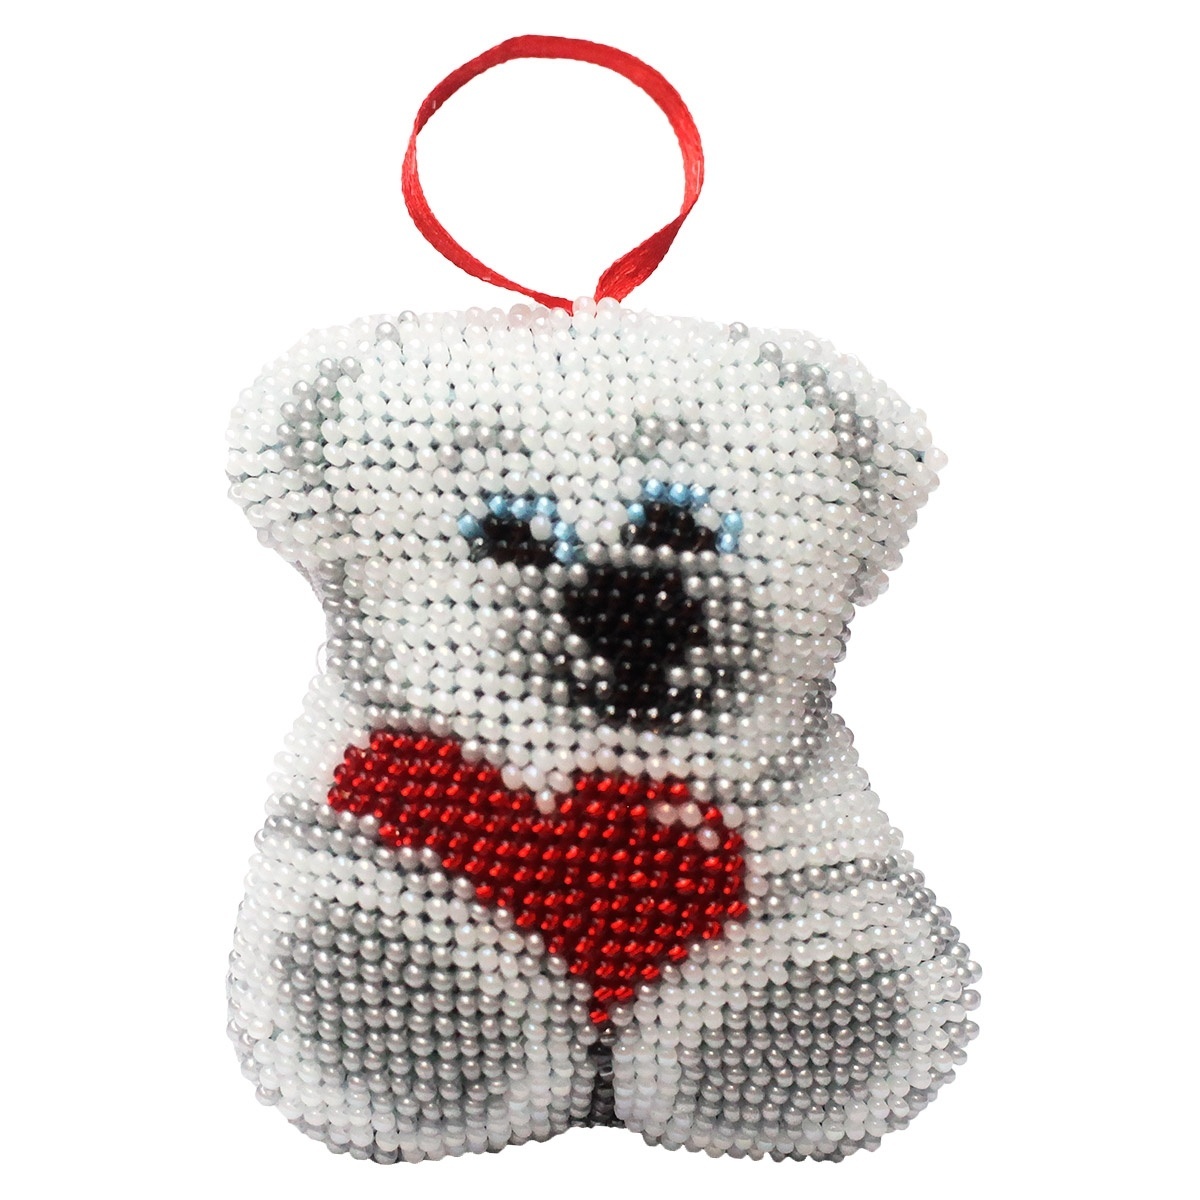 New Year's Toy Favorite Teddy Bear Bead Embroidery Kit фото 1